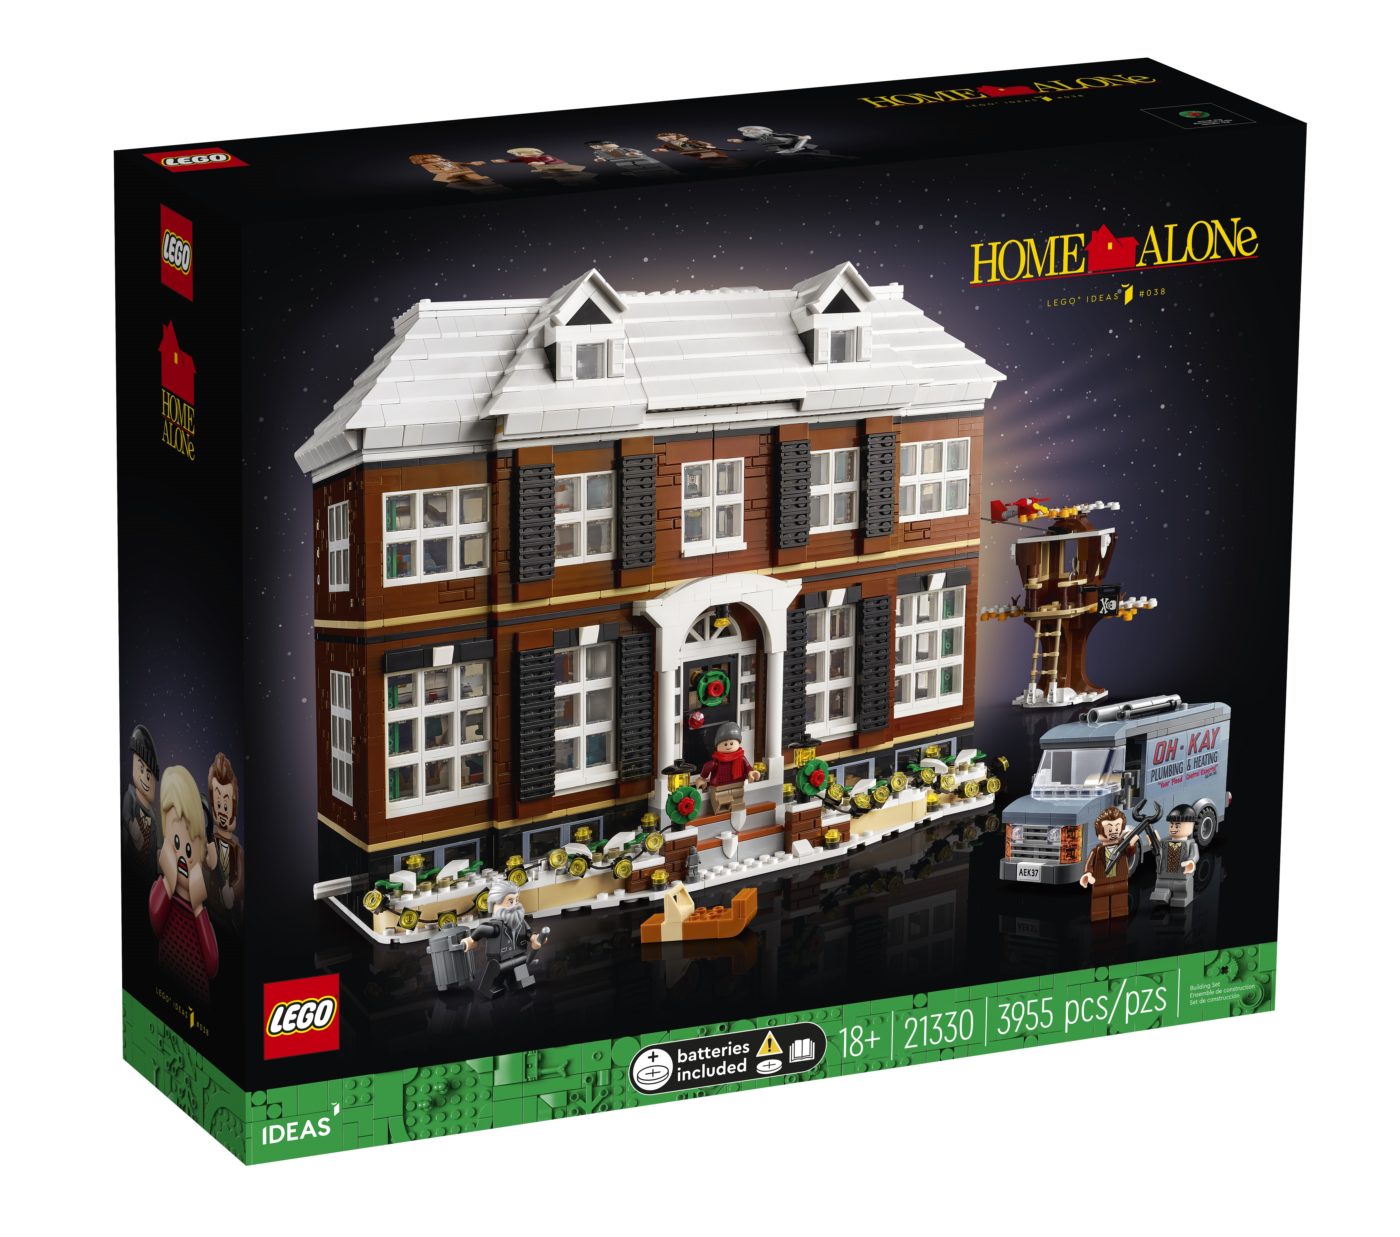 LEGO 21330 Home Alone Box Front